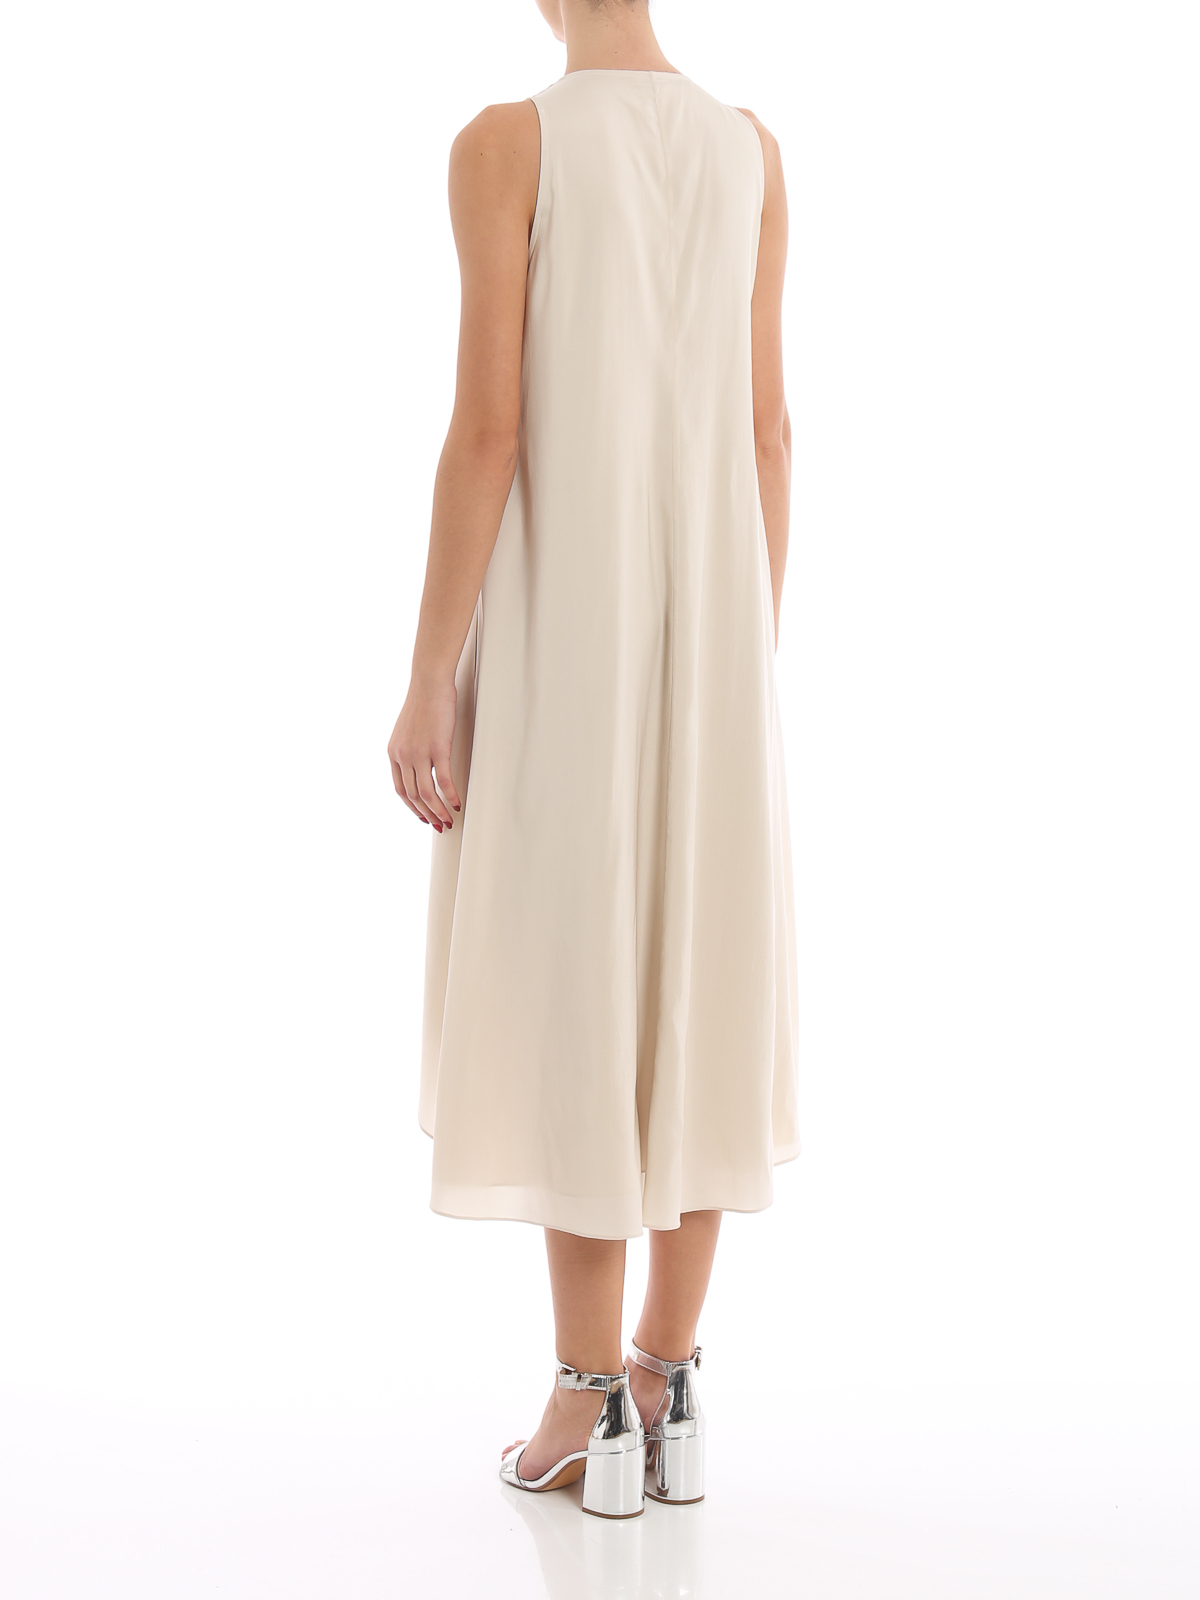 Cocktail dresses Brunello Cucinelli - Embellished front silk sleeveless  dress - MF948ADC71CE751